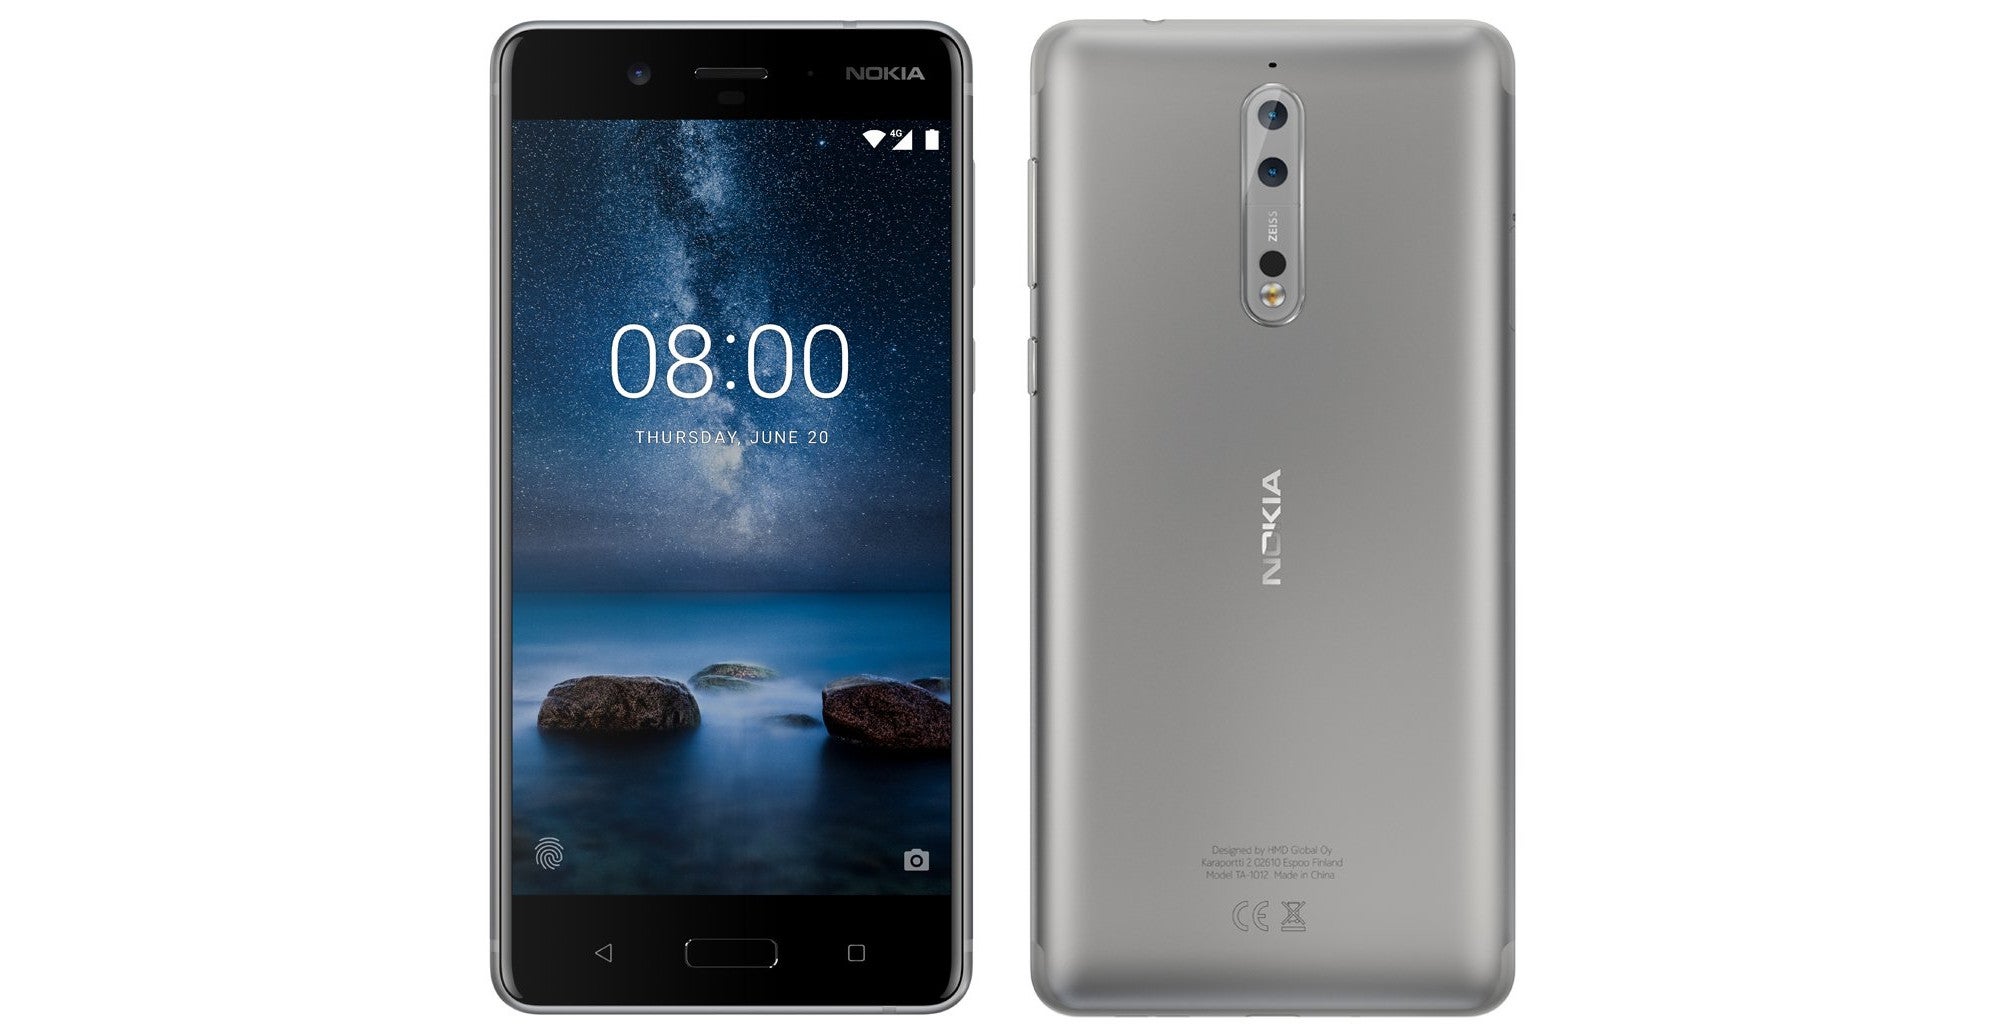 Here is the silver version of the upcoming Nokia 8 flagship